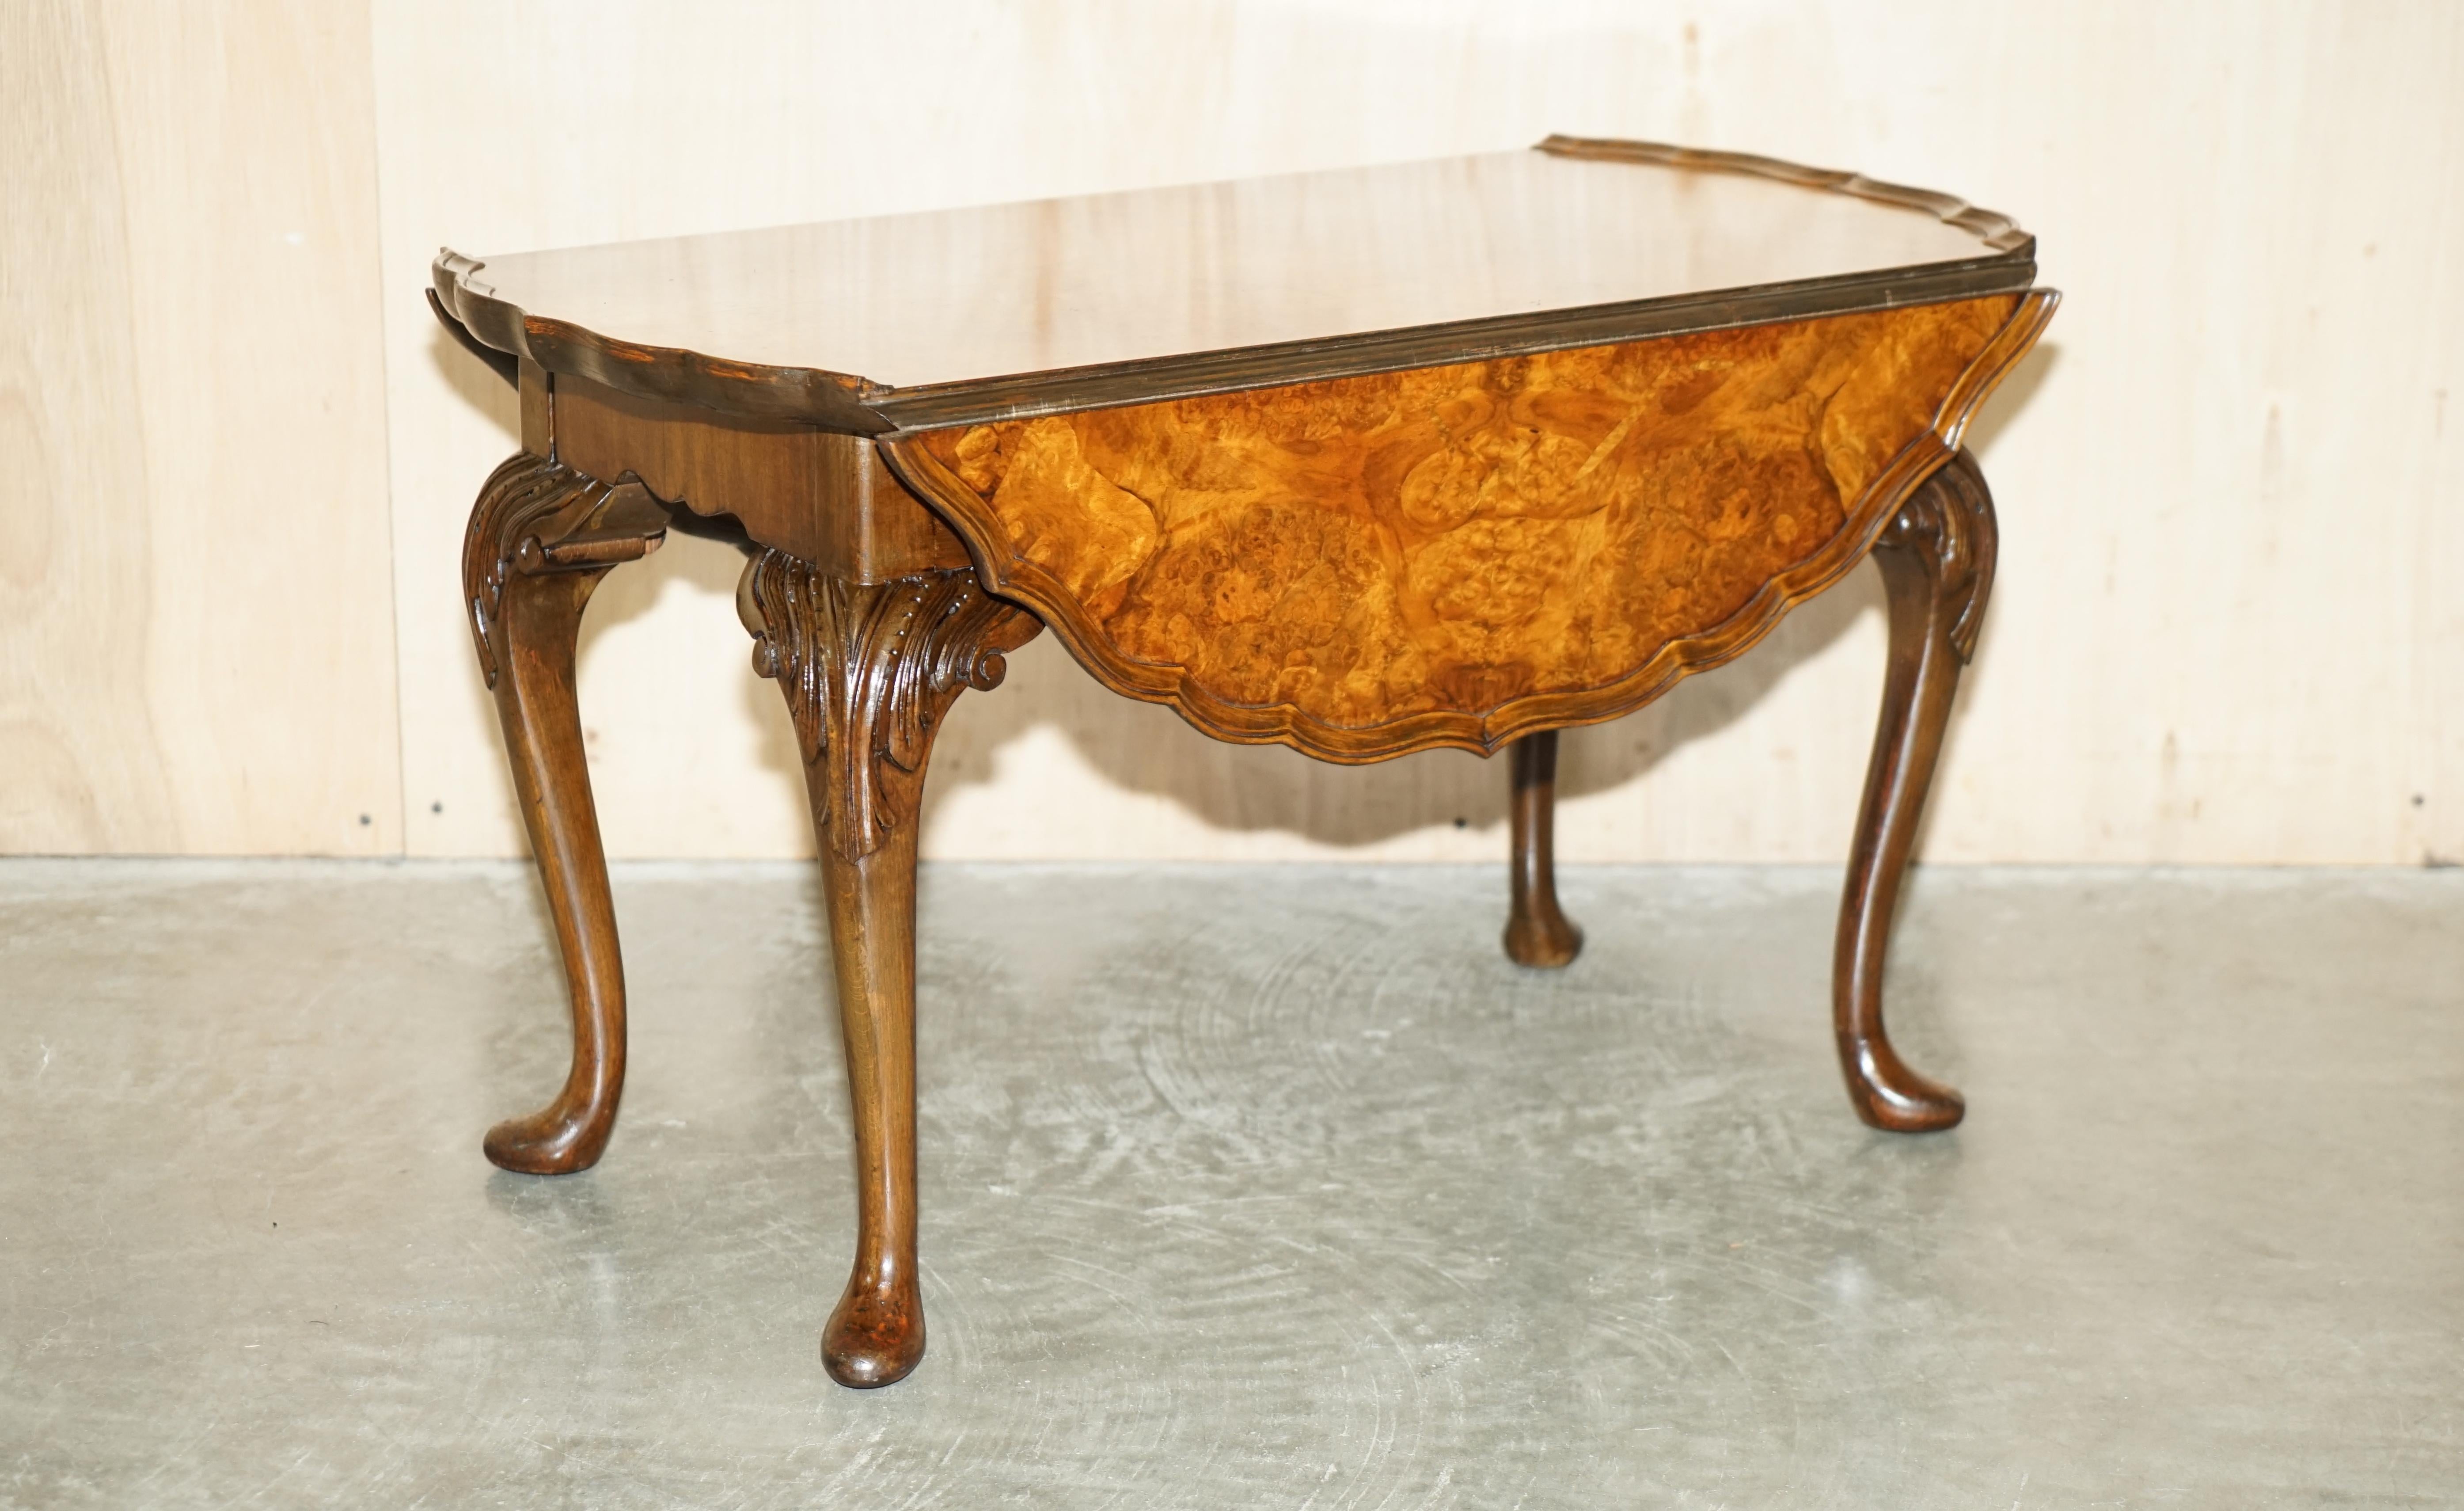 We are delighted to offer for sale this stunning hand made in England, quarter cut and burr walnut, extending coffee table with stunning timber patina and scalloped edge pie crust top 

A good looking, well made and decorative coffee table with